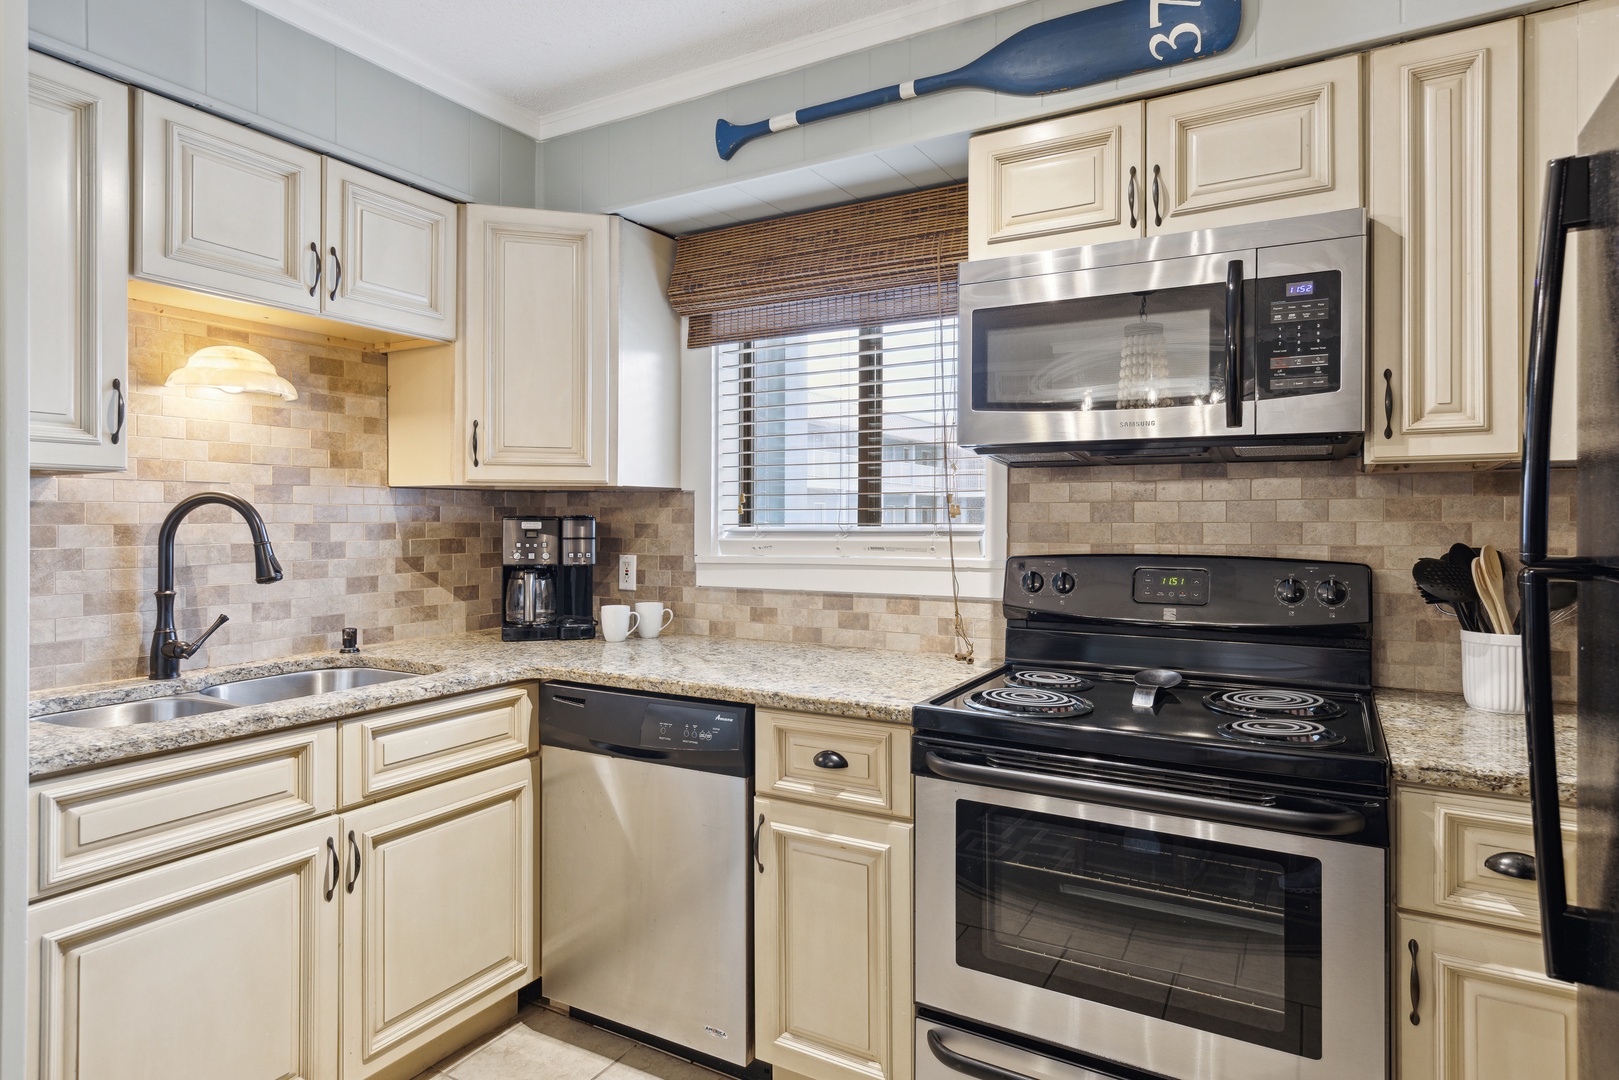 The elegant kitchen offers ample space & all the comforts of home